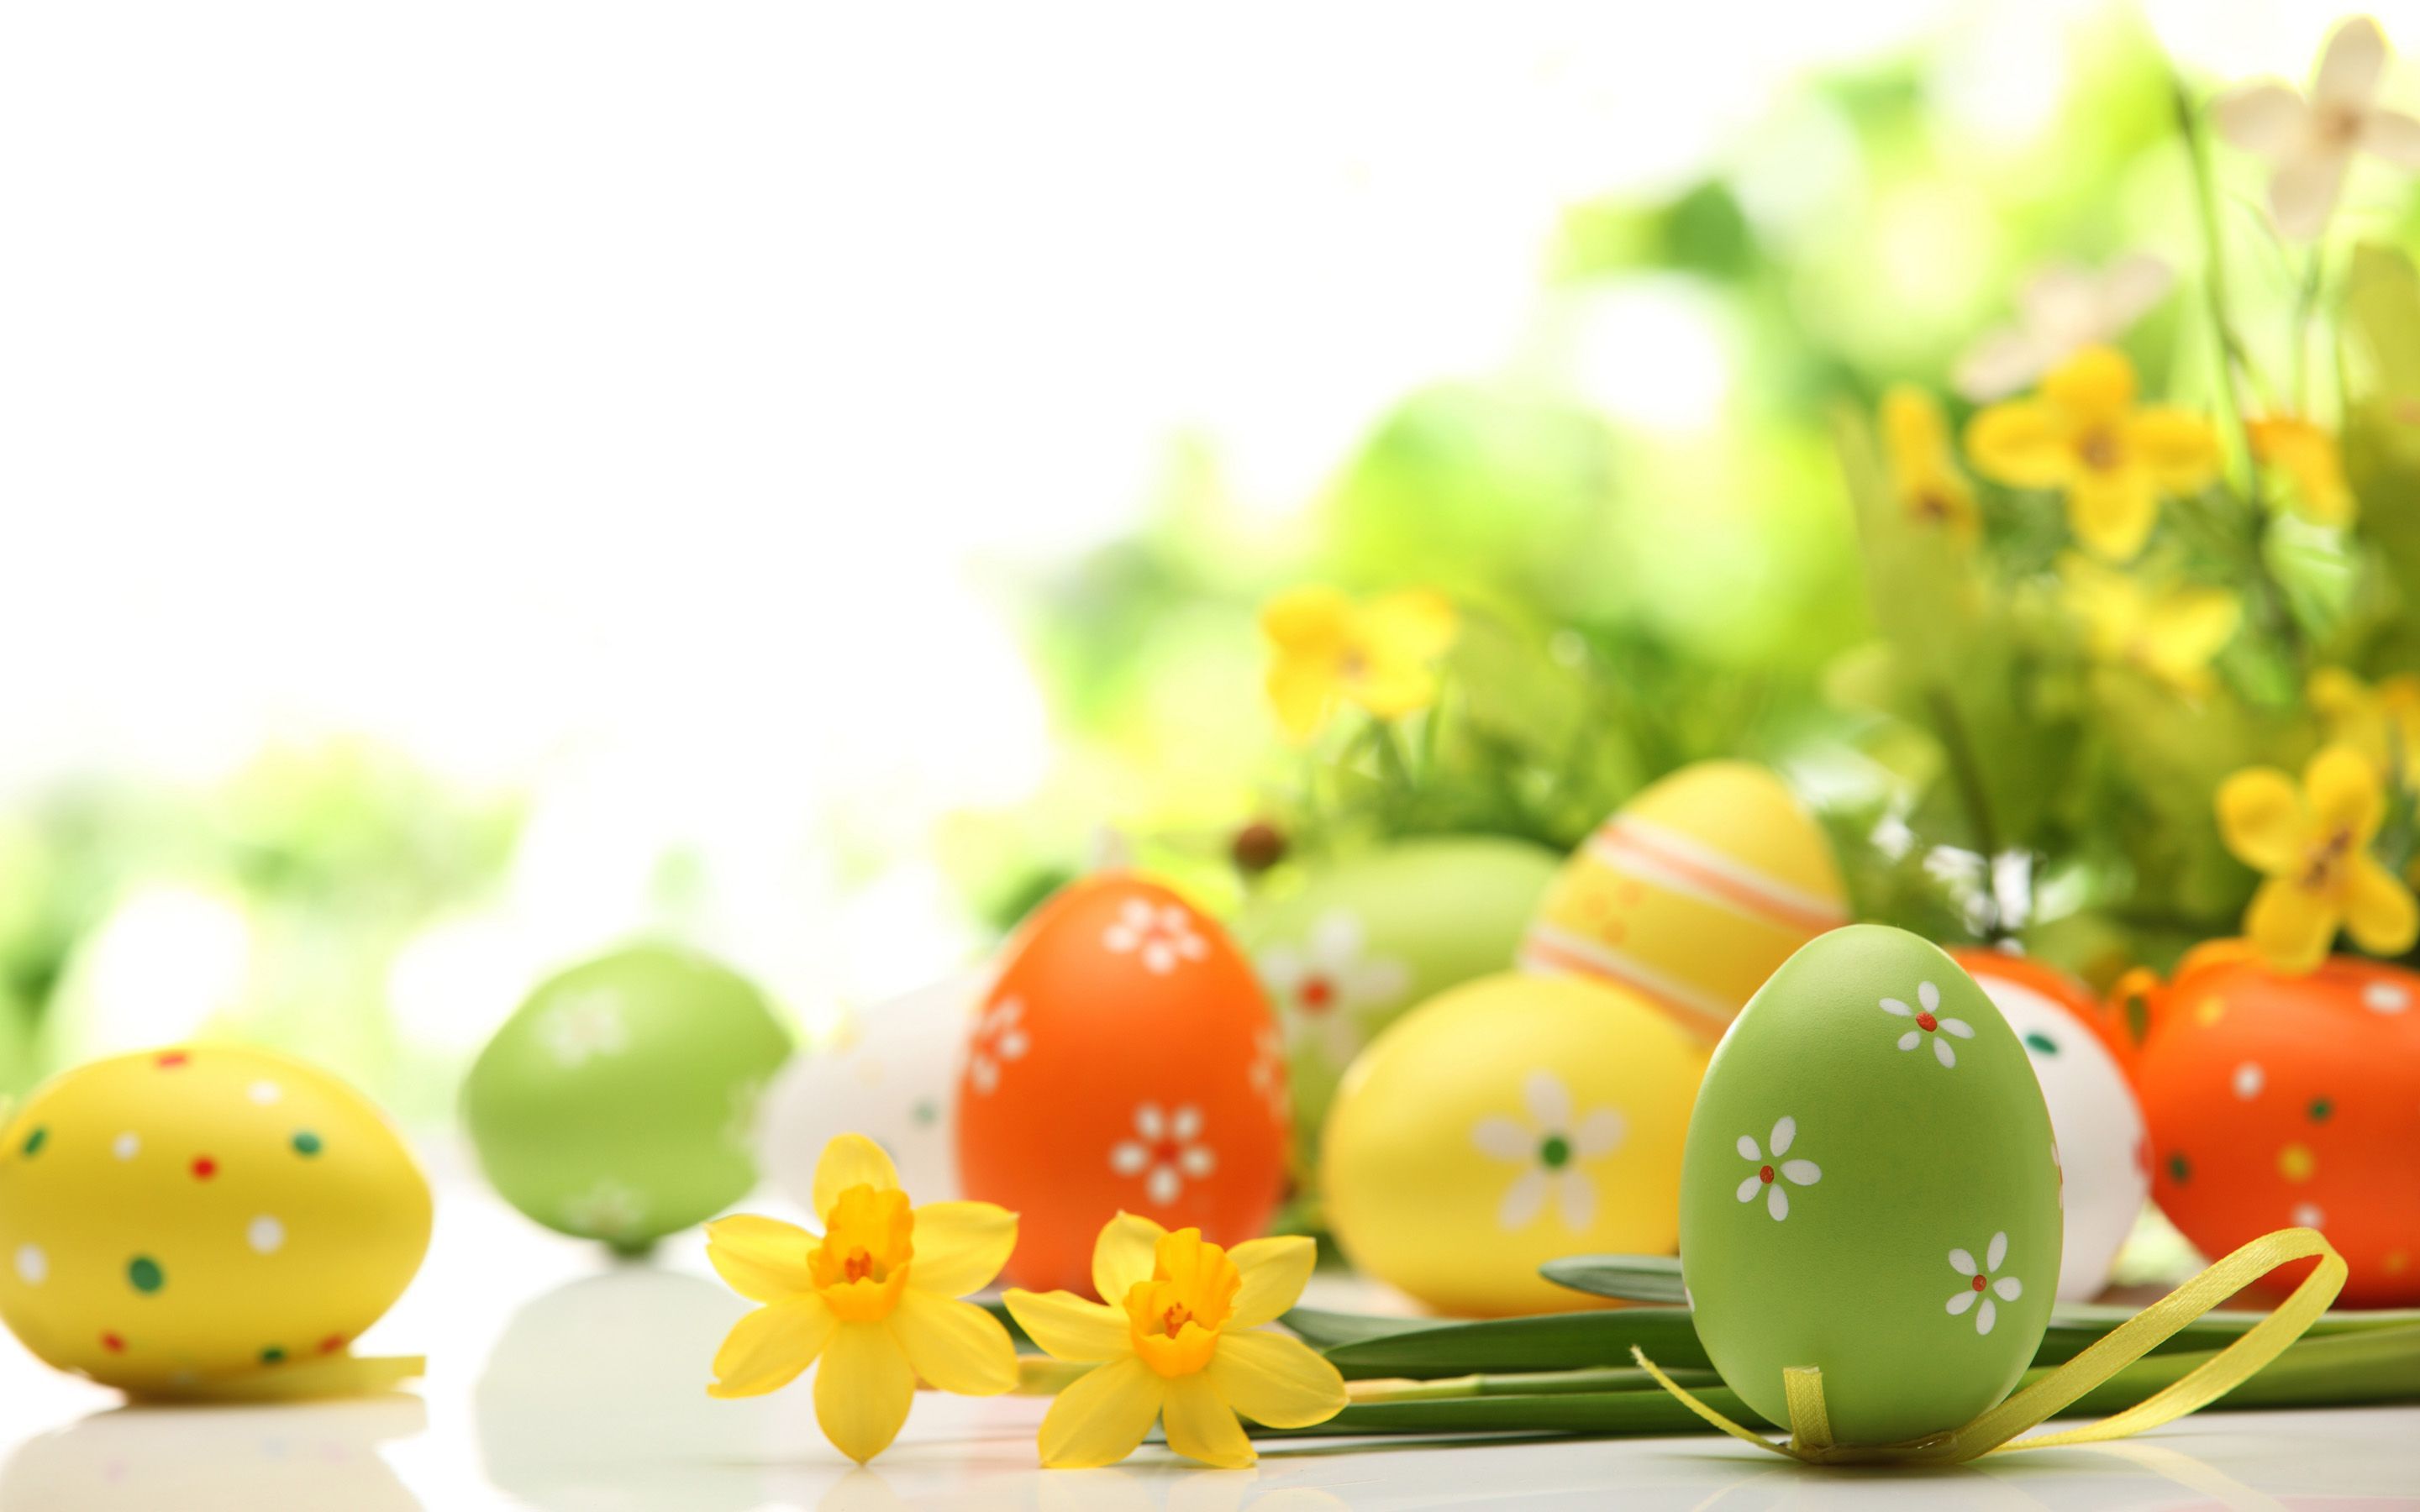 Easter Wallpaper HD download free Wallpapers, Backgrounds